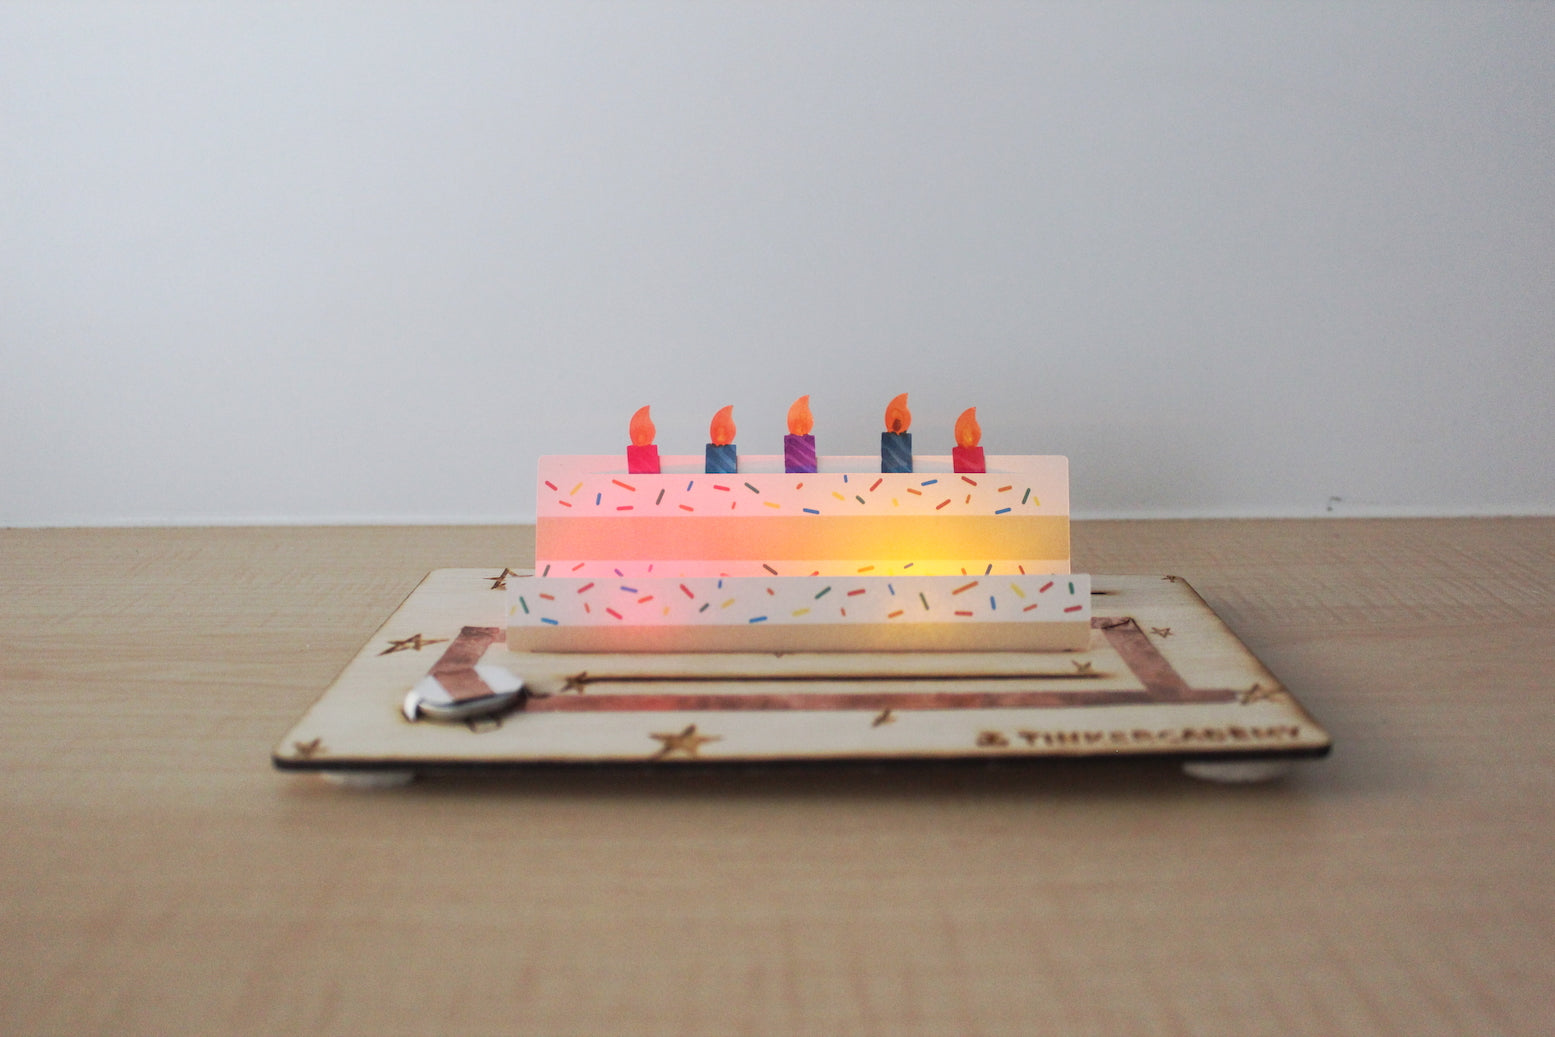 Tinkercademy's Evergreeting Diorama Kit Birthday Greeting Card lighted; Paper craft with Chibitronic LEDs and copper tape.